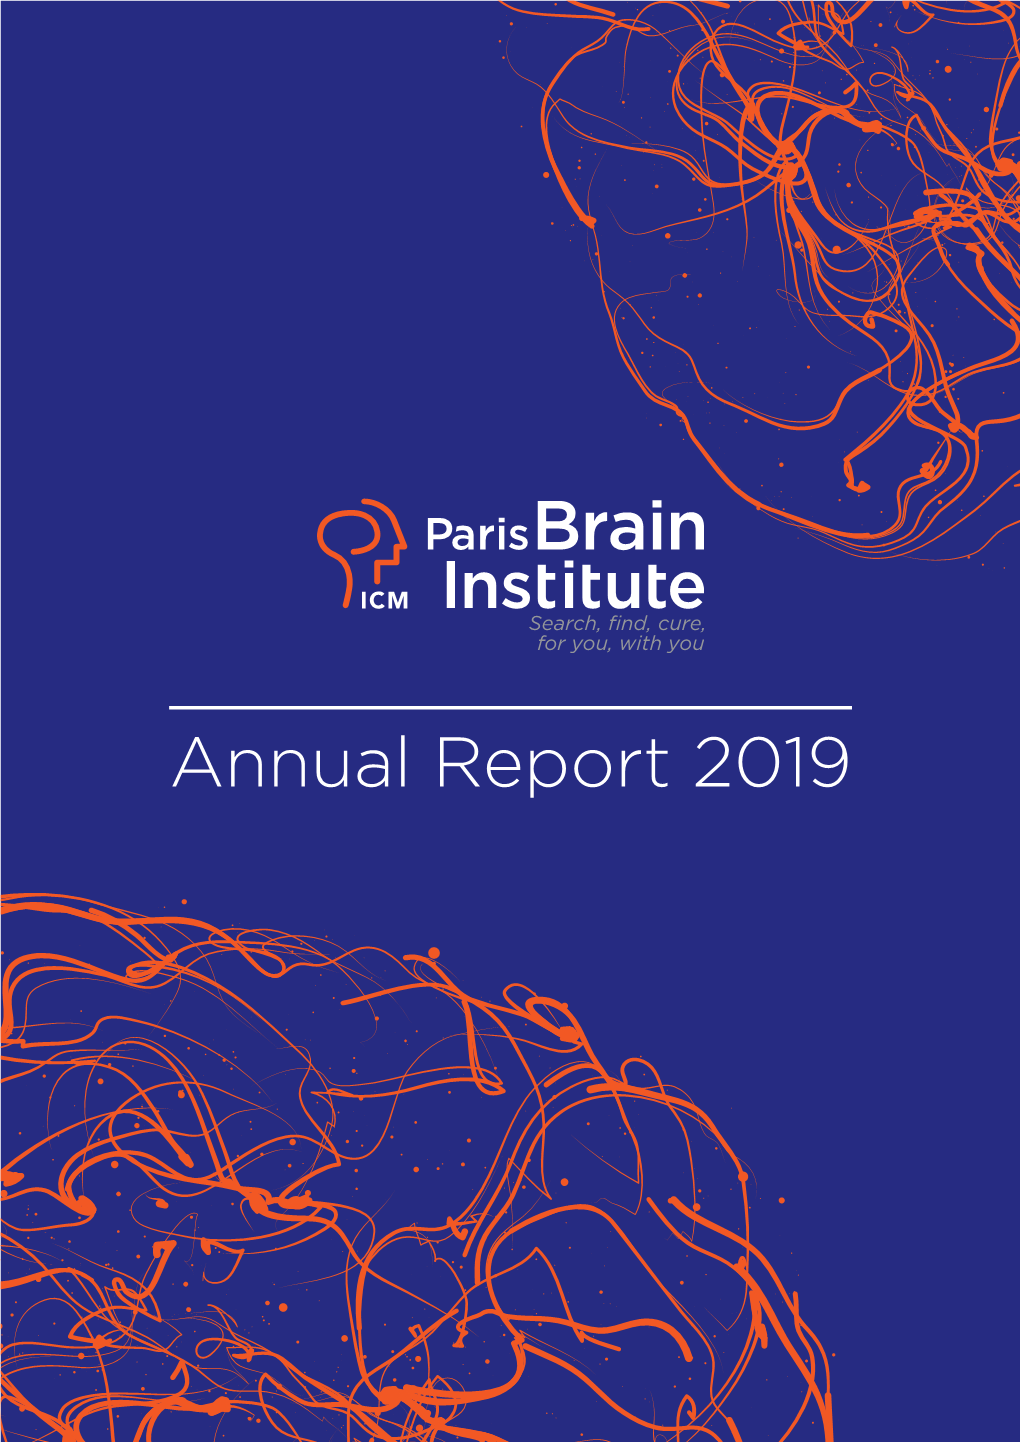 Annual Report 2019 Key Figures - 2019 Table of Contents